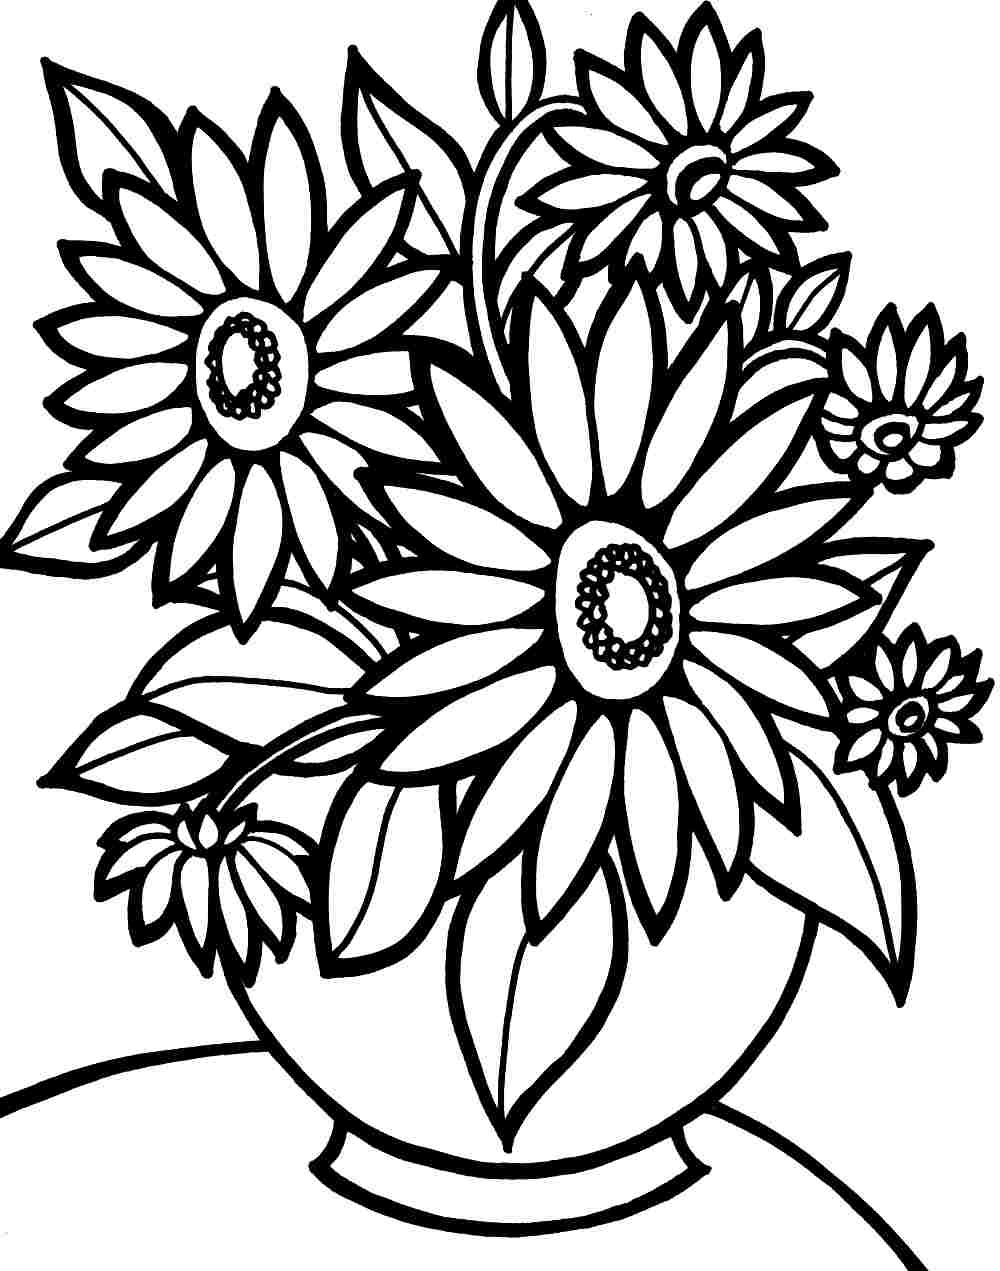 Bouquet Of Flowers Coloring Page Printable Flower Coloring Pages For Girls 14 N Colouring Pages Photo